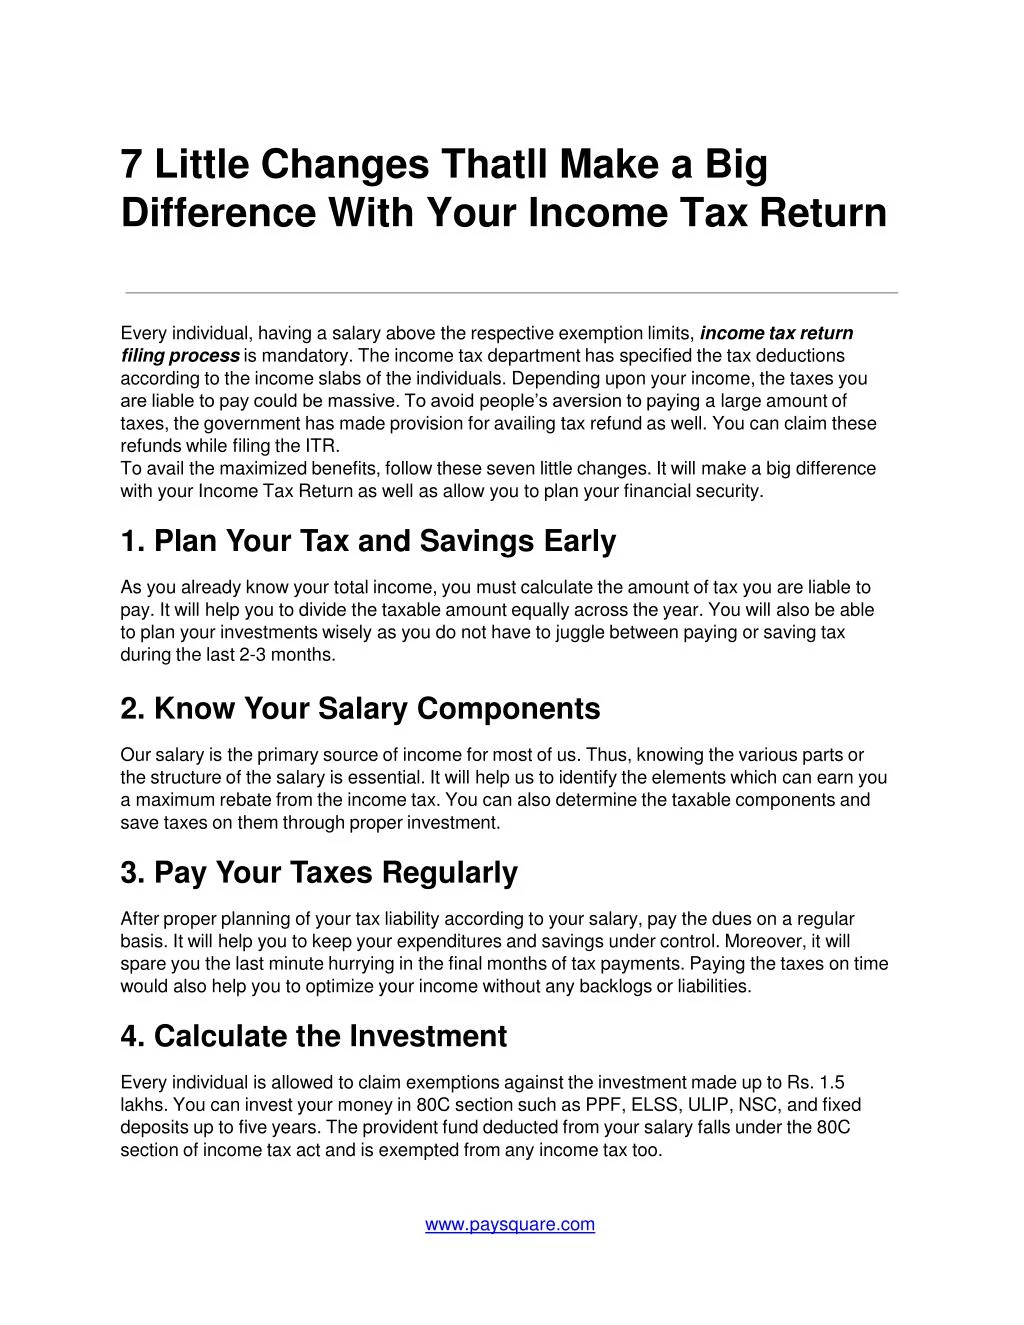 7 little changes thatll make a big difference with your income tax return